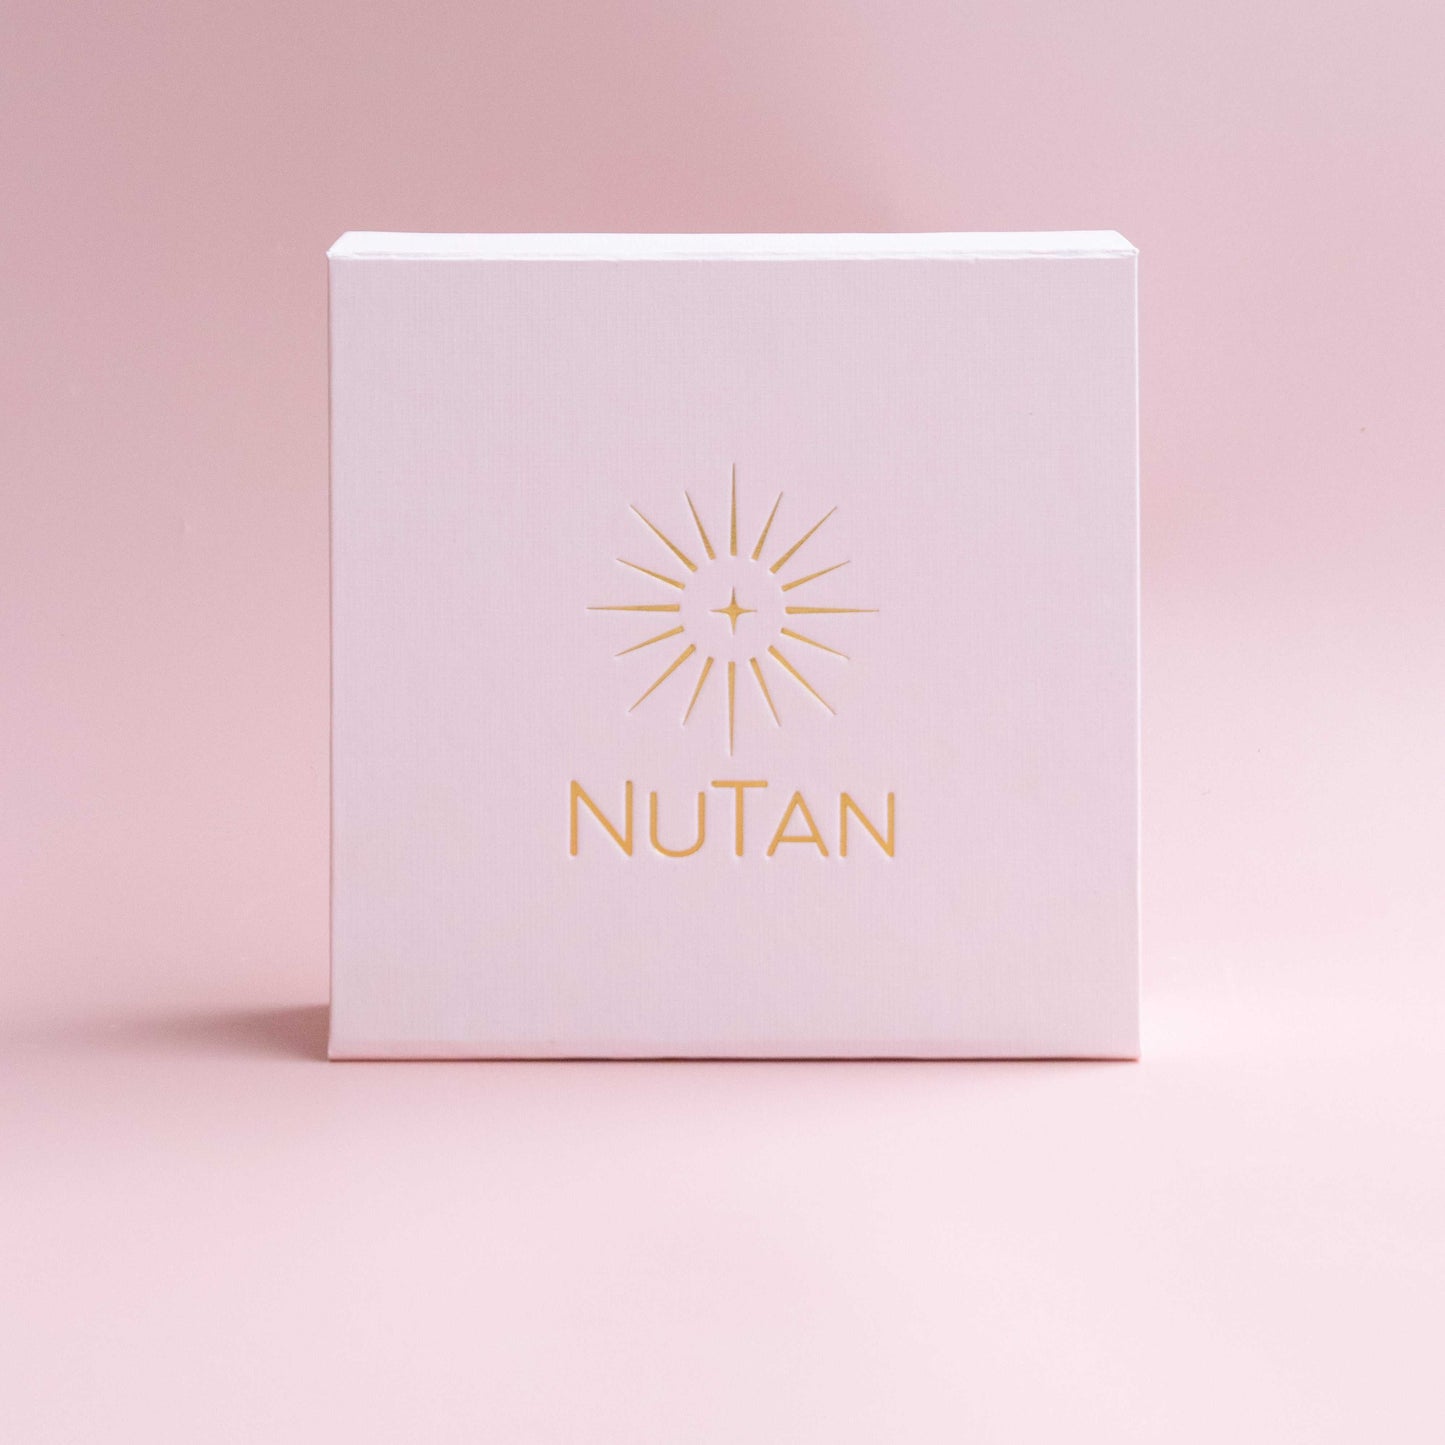 NuTan® tanning kits include 5 pouches comprising of 10 tanning patches presented in a pink box.